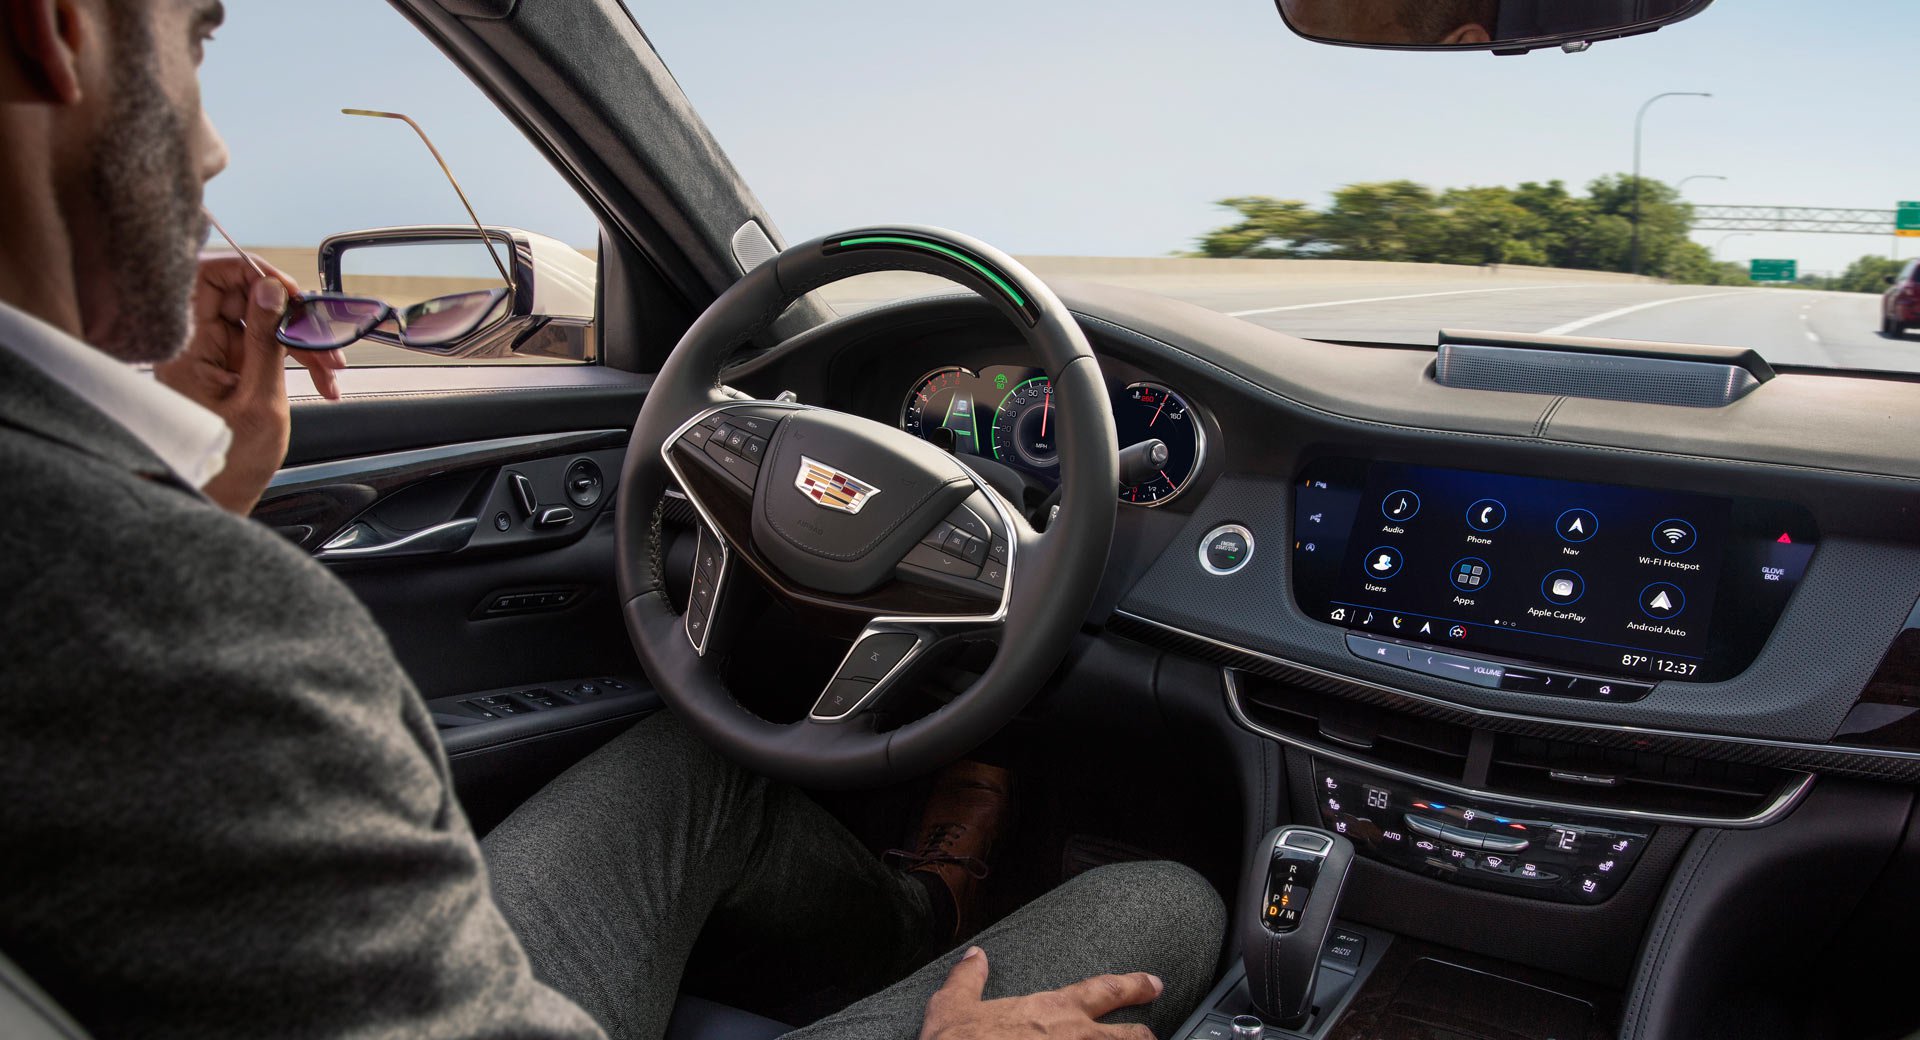 Cadillac’s Super Cruise Semi-Autonomous Driving System Gaining 70,000 Miles Of New Compatible Highways